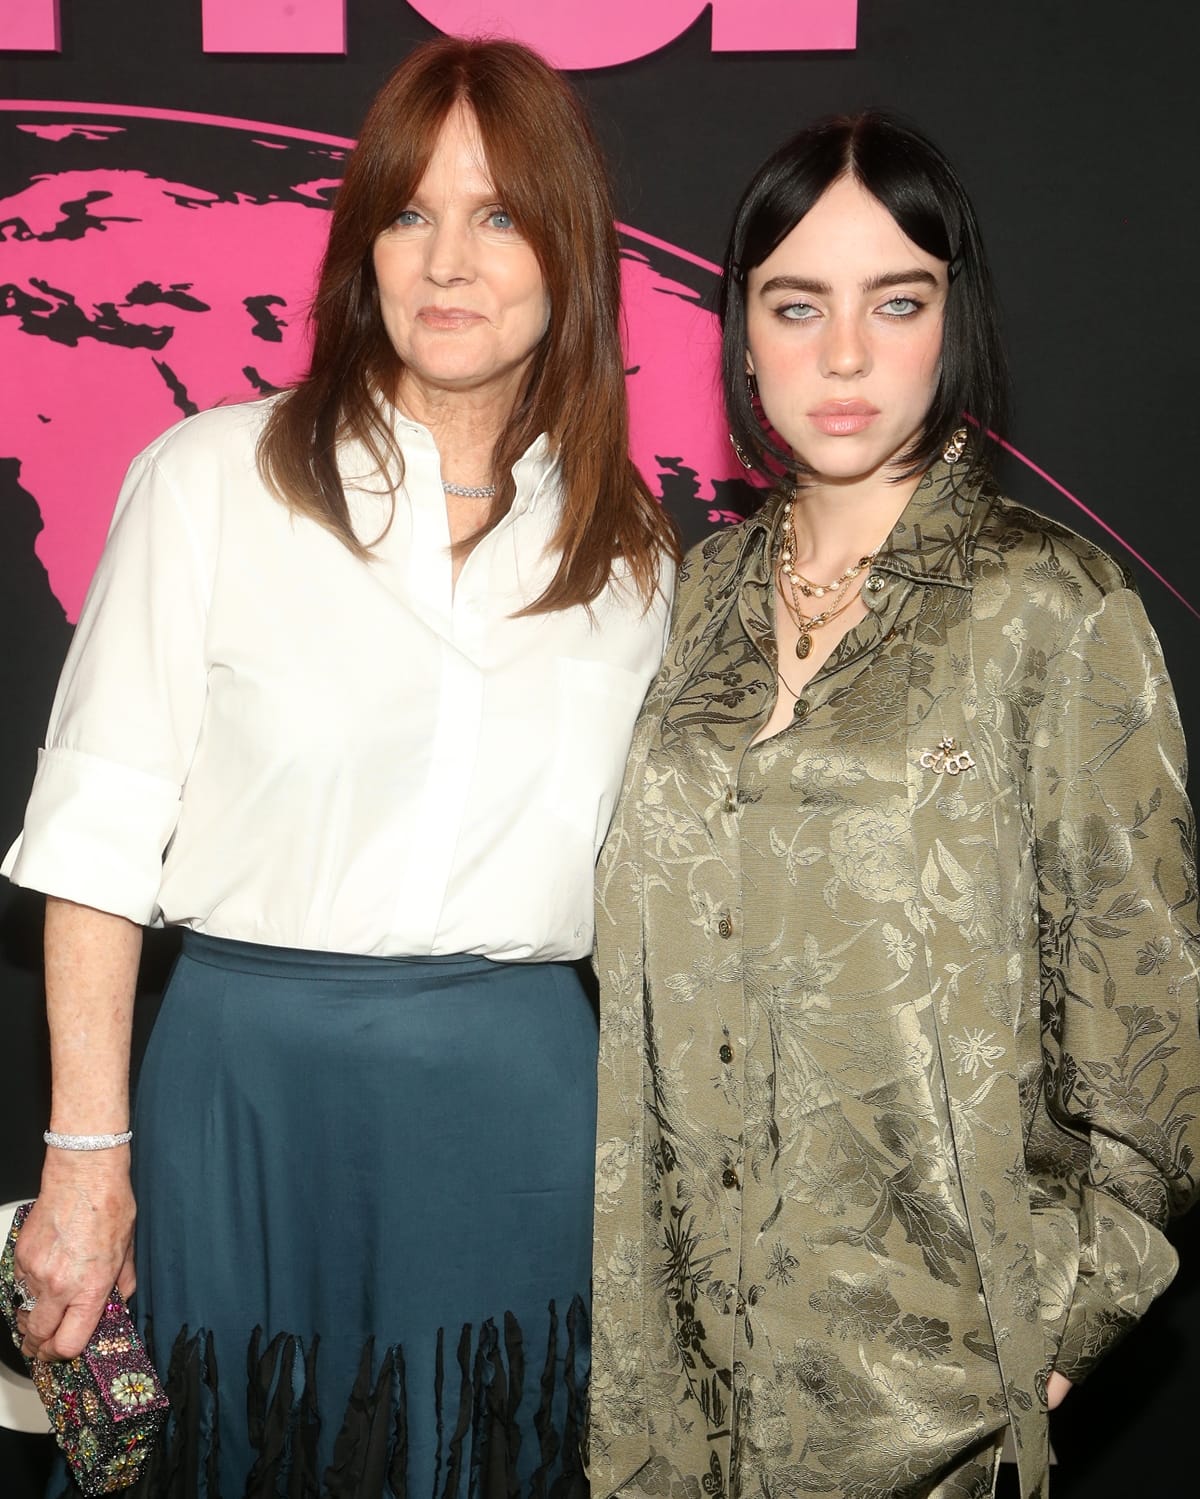 Maggie Baird and her daughter Billie Eilish attend the Environmental Media Association Awards Gala